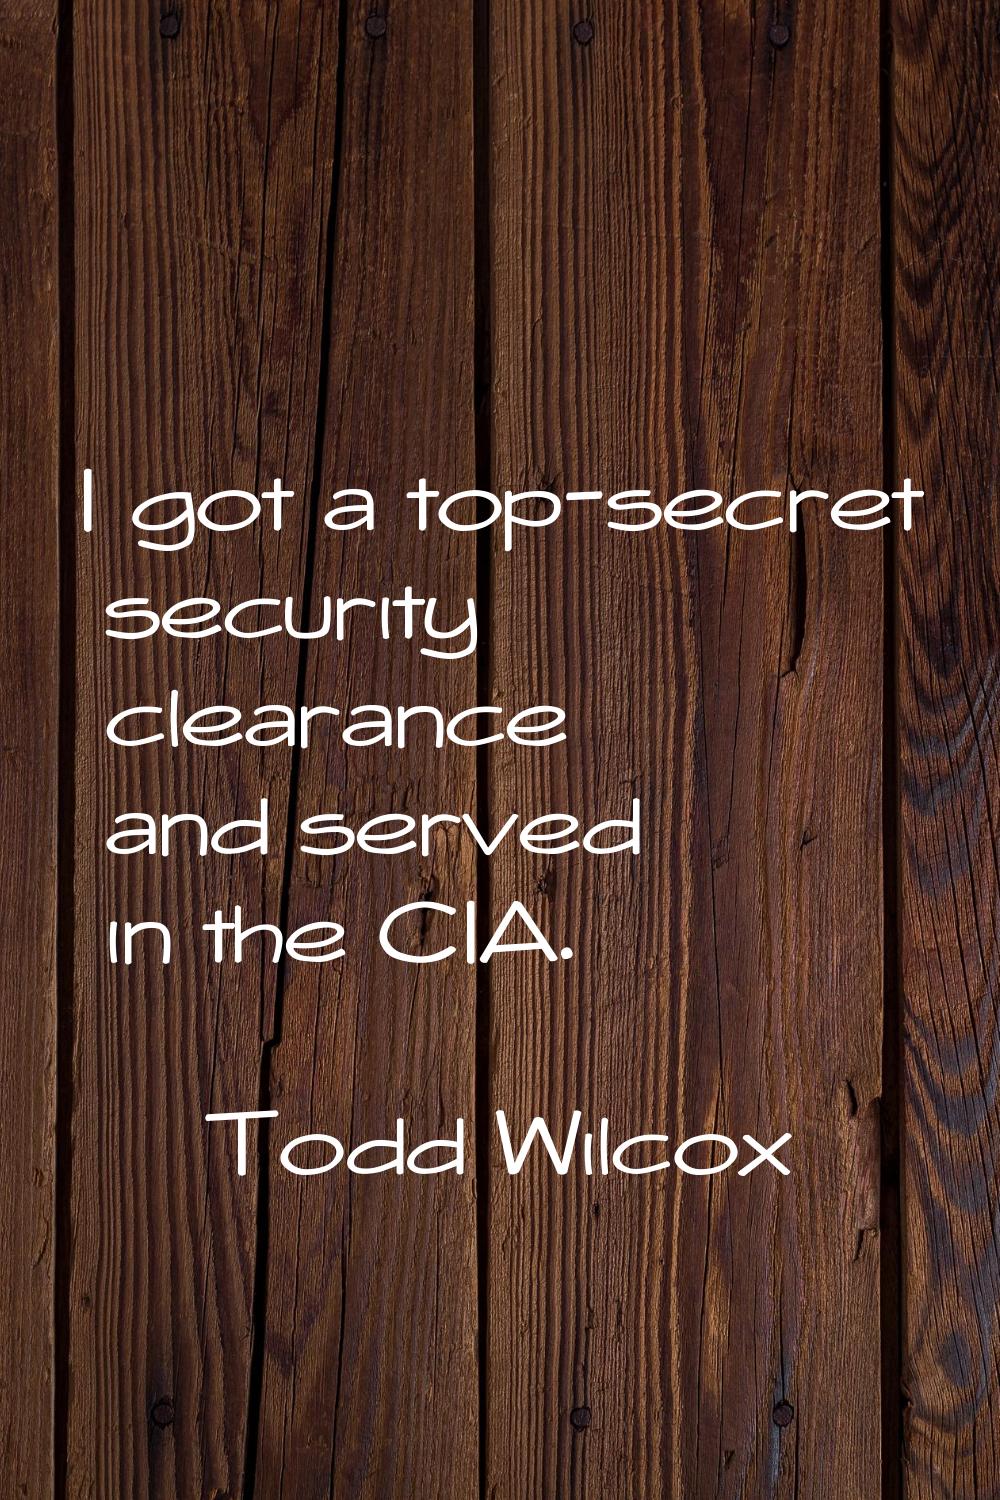 I got a top-secret security clearance and served in the CIA.